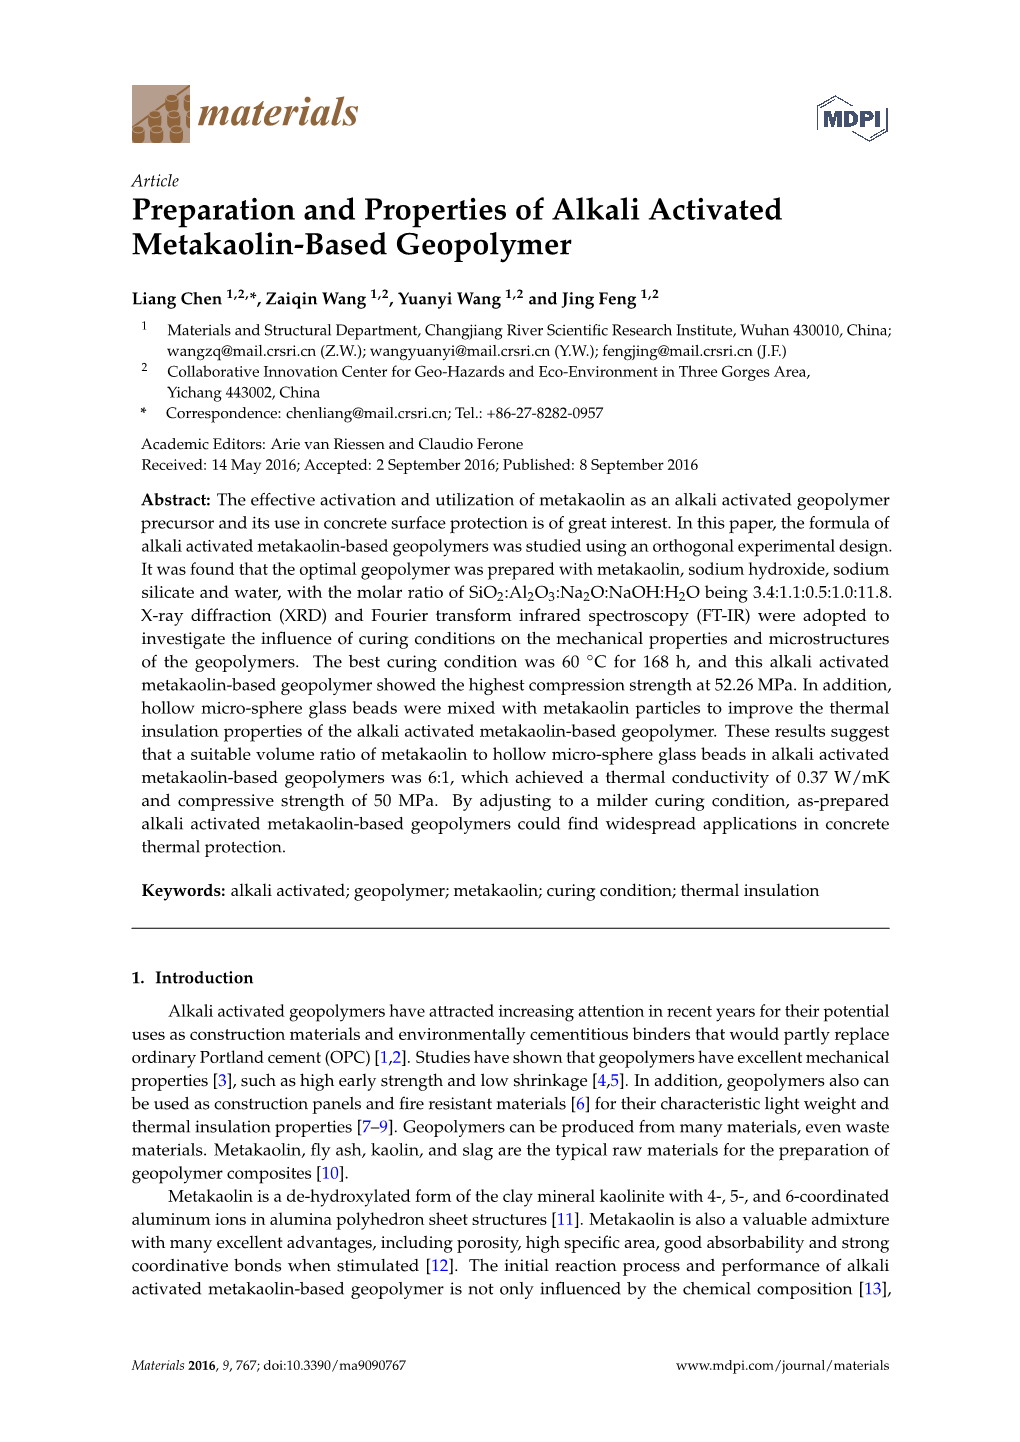 Preparation and Properties of Alkali Activated Metakaolin-Based Geopolymer